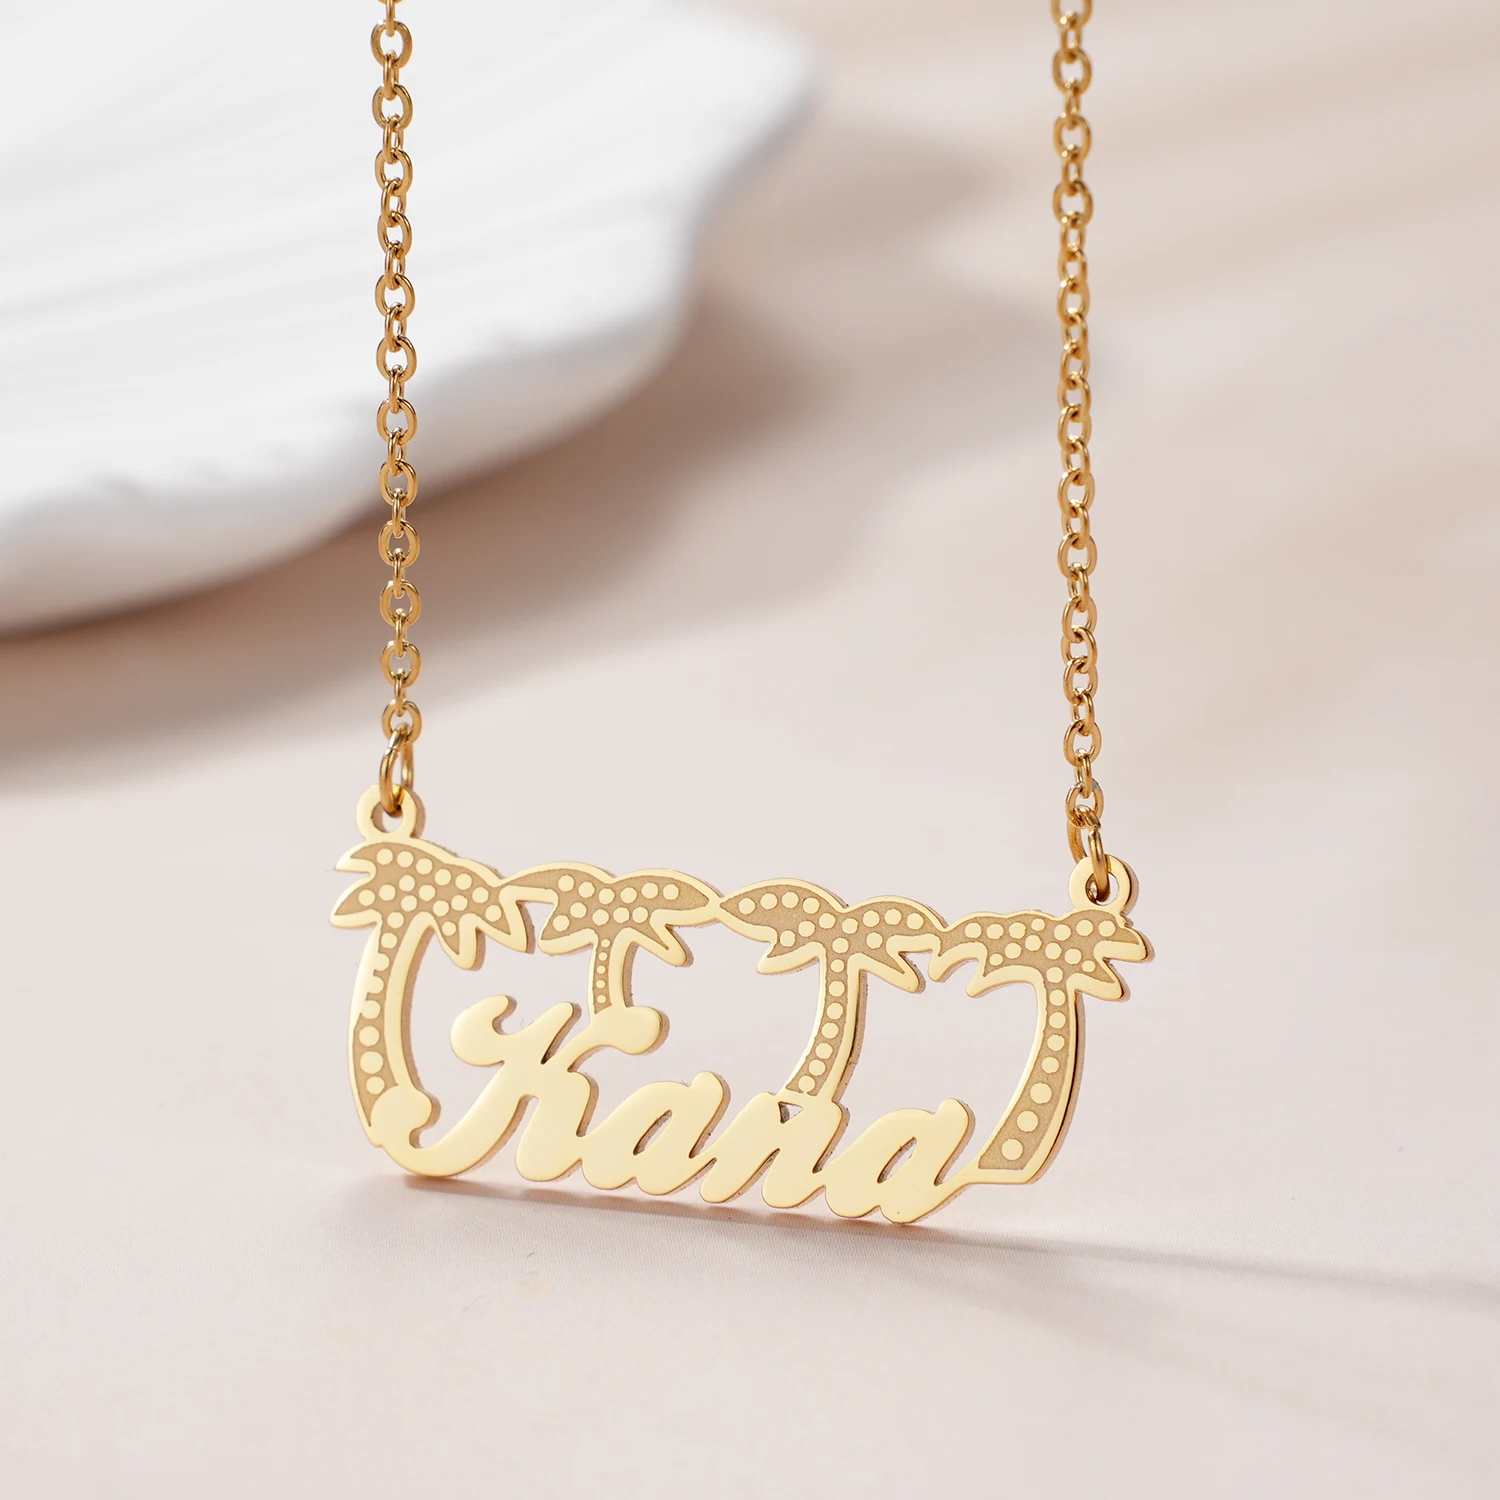 Personalized Name Necklace With Coconut Tree Double Plated Nameplate Custom Pendant Stainless Stee Jewelry Gift For Women Girls